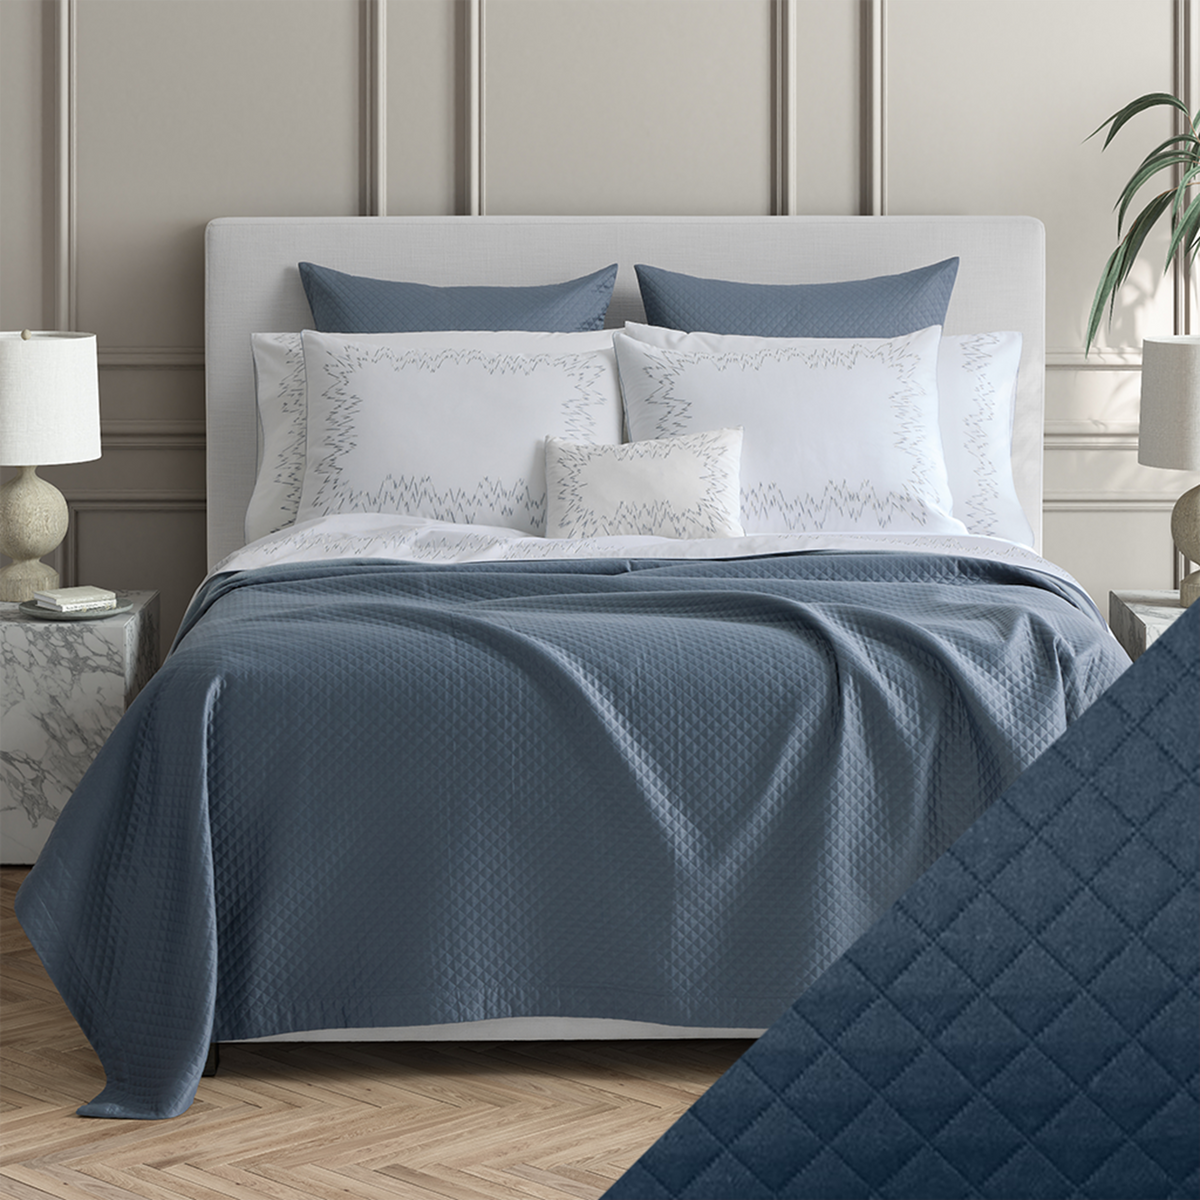 Bed Dressed in Matouk Petra Bedding with Swatch in Color Prussian Blue